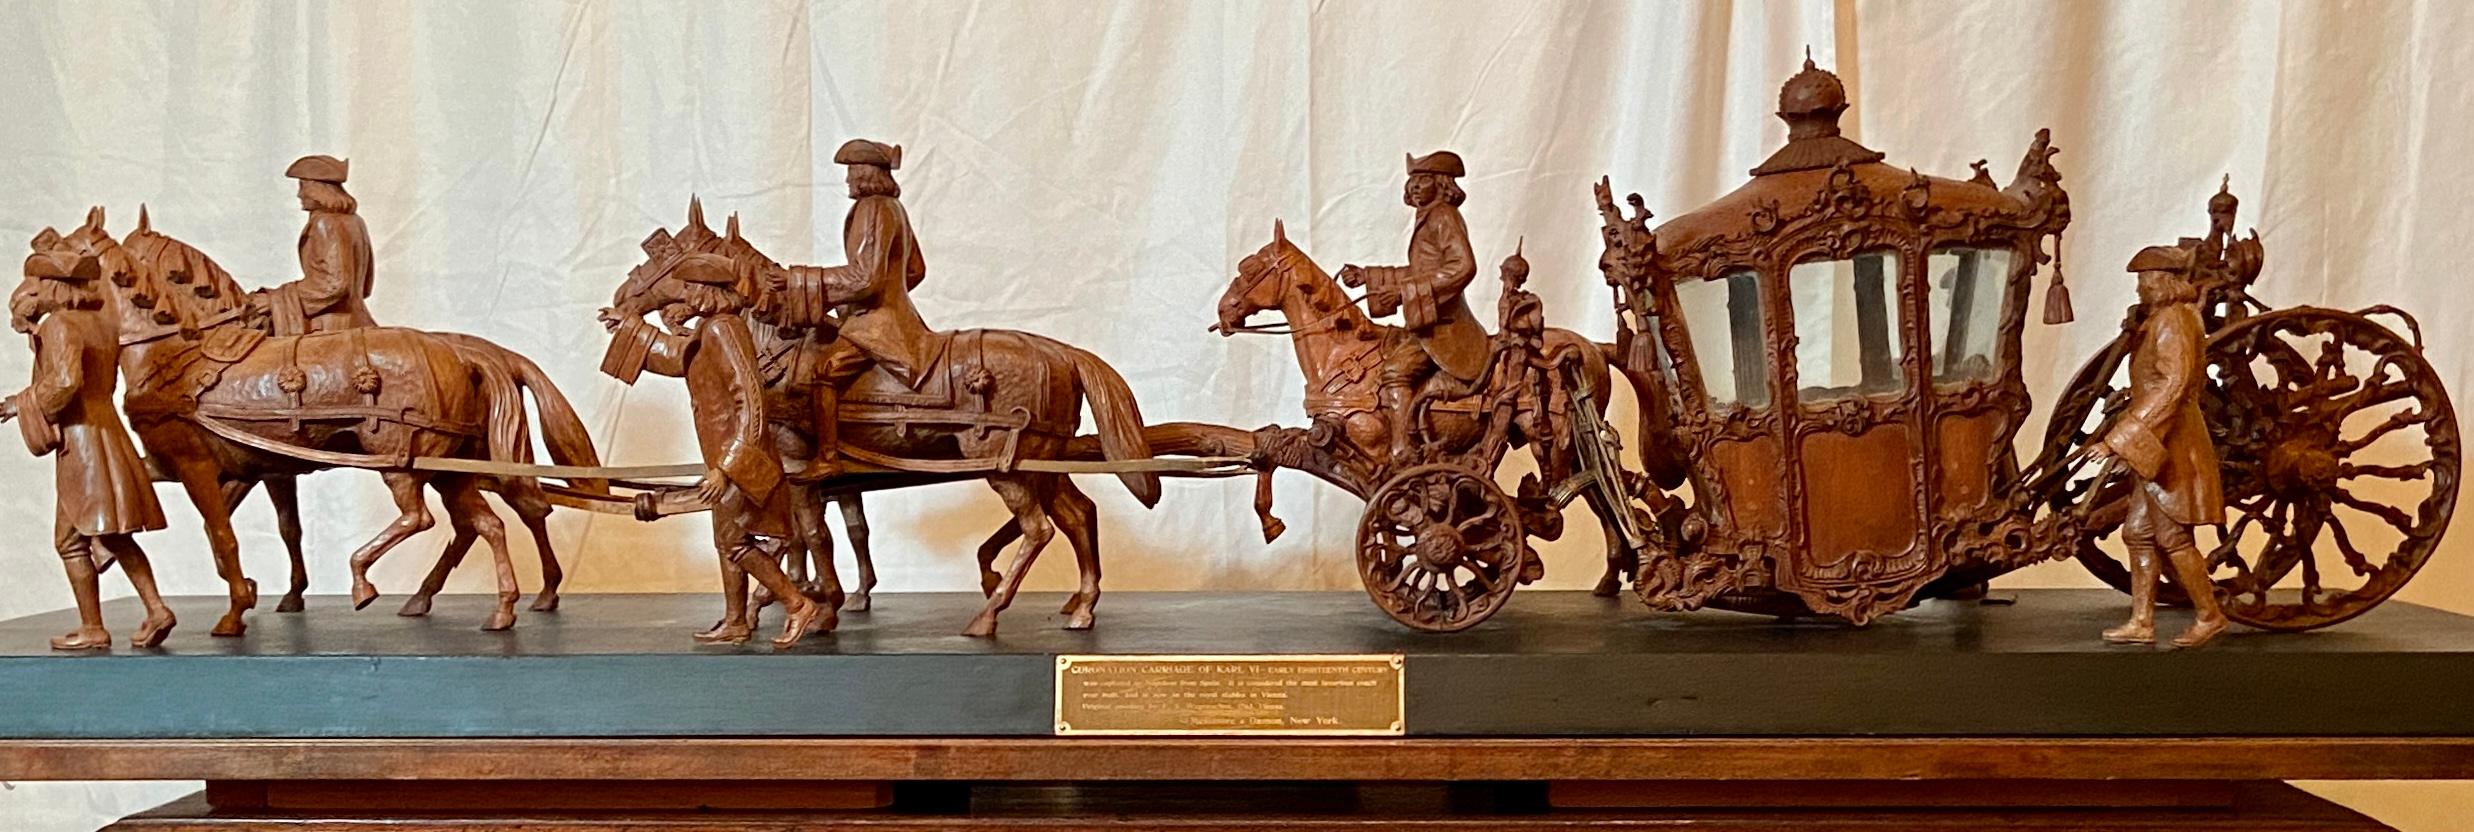 Estate American Intricately Carved Walnut Museum Maquette / Model of 18th Century Vienna Coronation Carriage. Designed and Constructed by the firm Messmore and Damon, New York. This is a superbly crafted model of the coronation carriage of Emperor